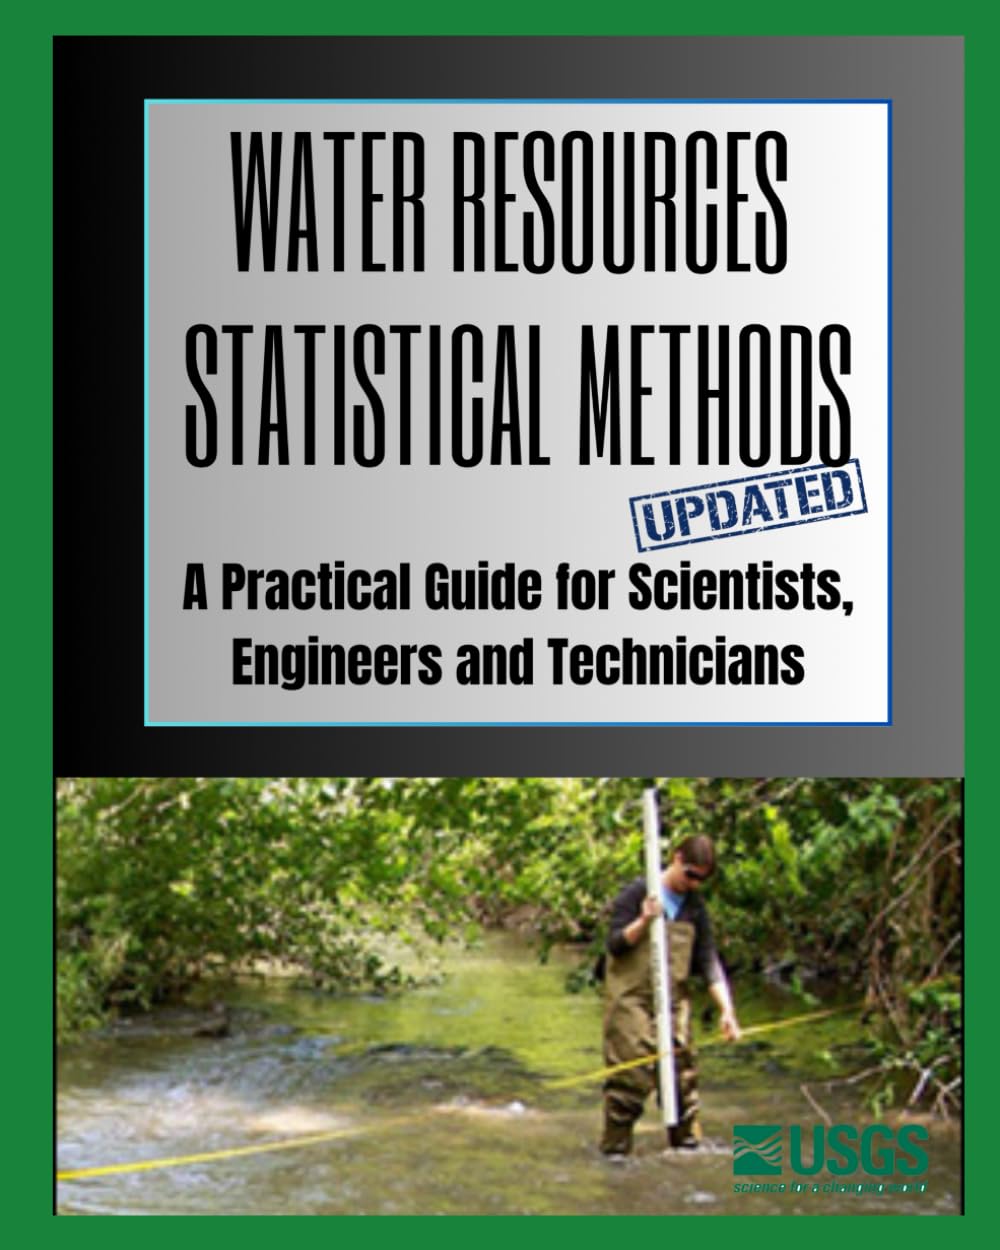 WATER RESOURCES STATISTICAL METHODS: A Practical Guide for Scientists, Engineers, and Technicians